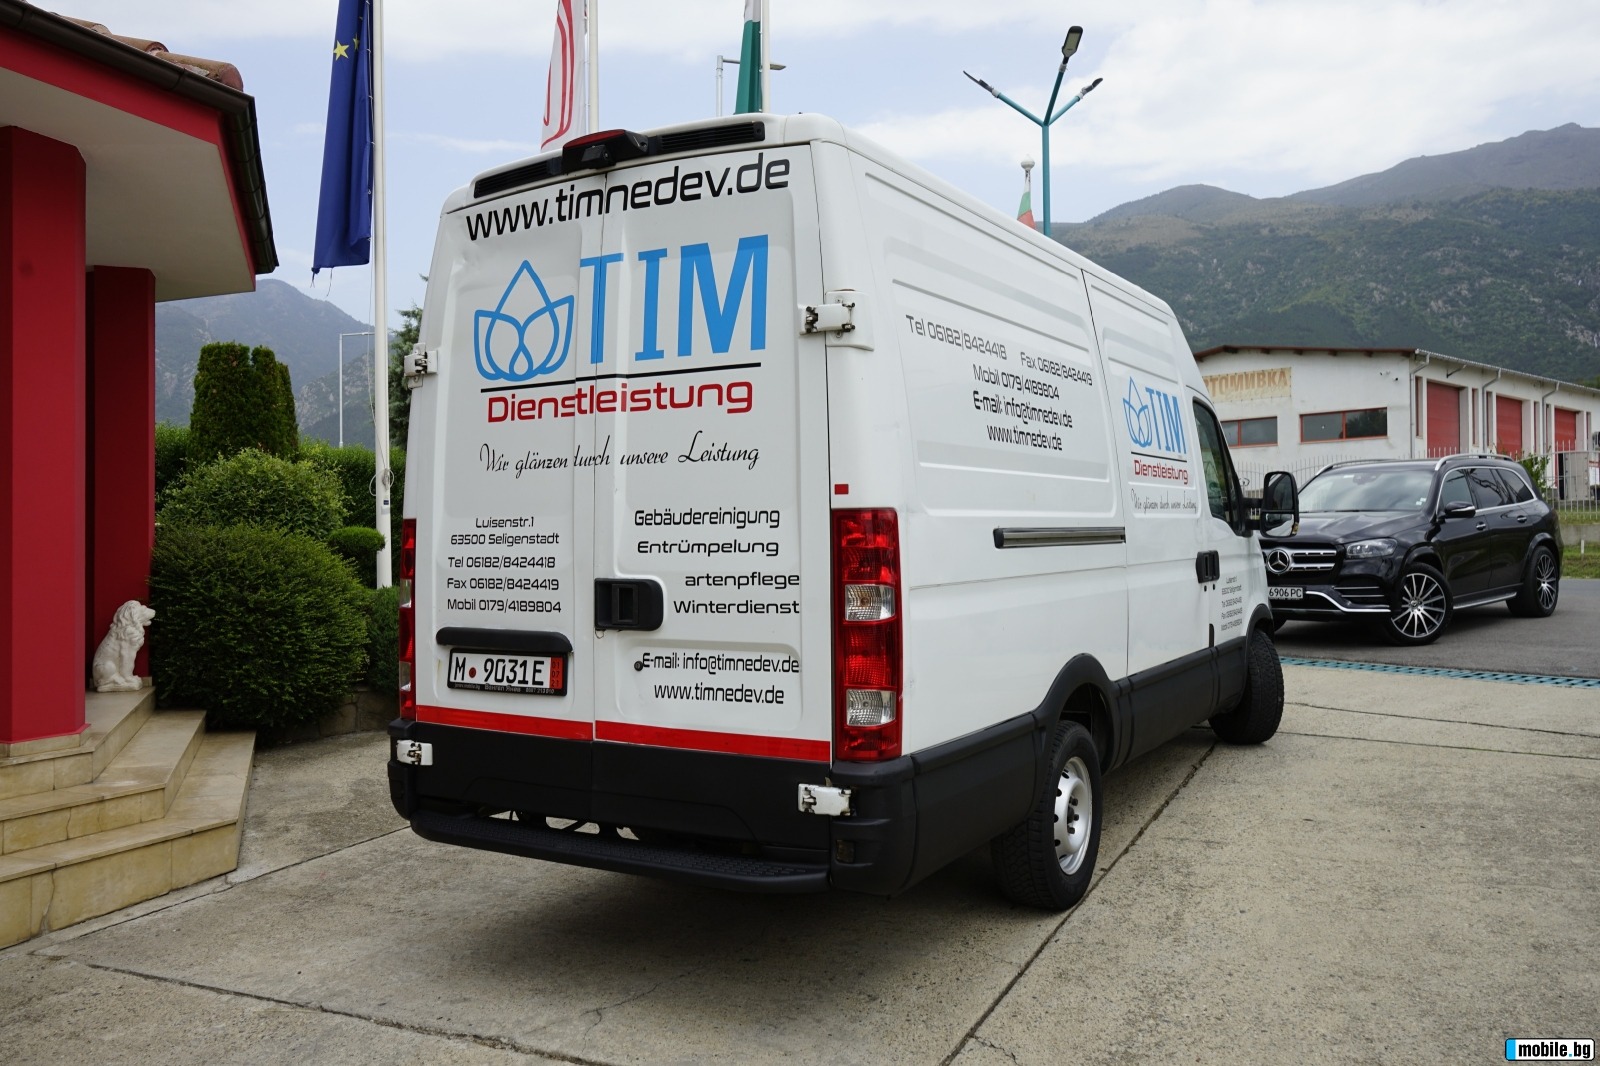 Iveco Daily 35s13 | Mobile.bg   8